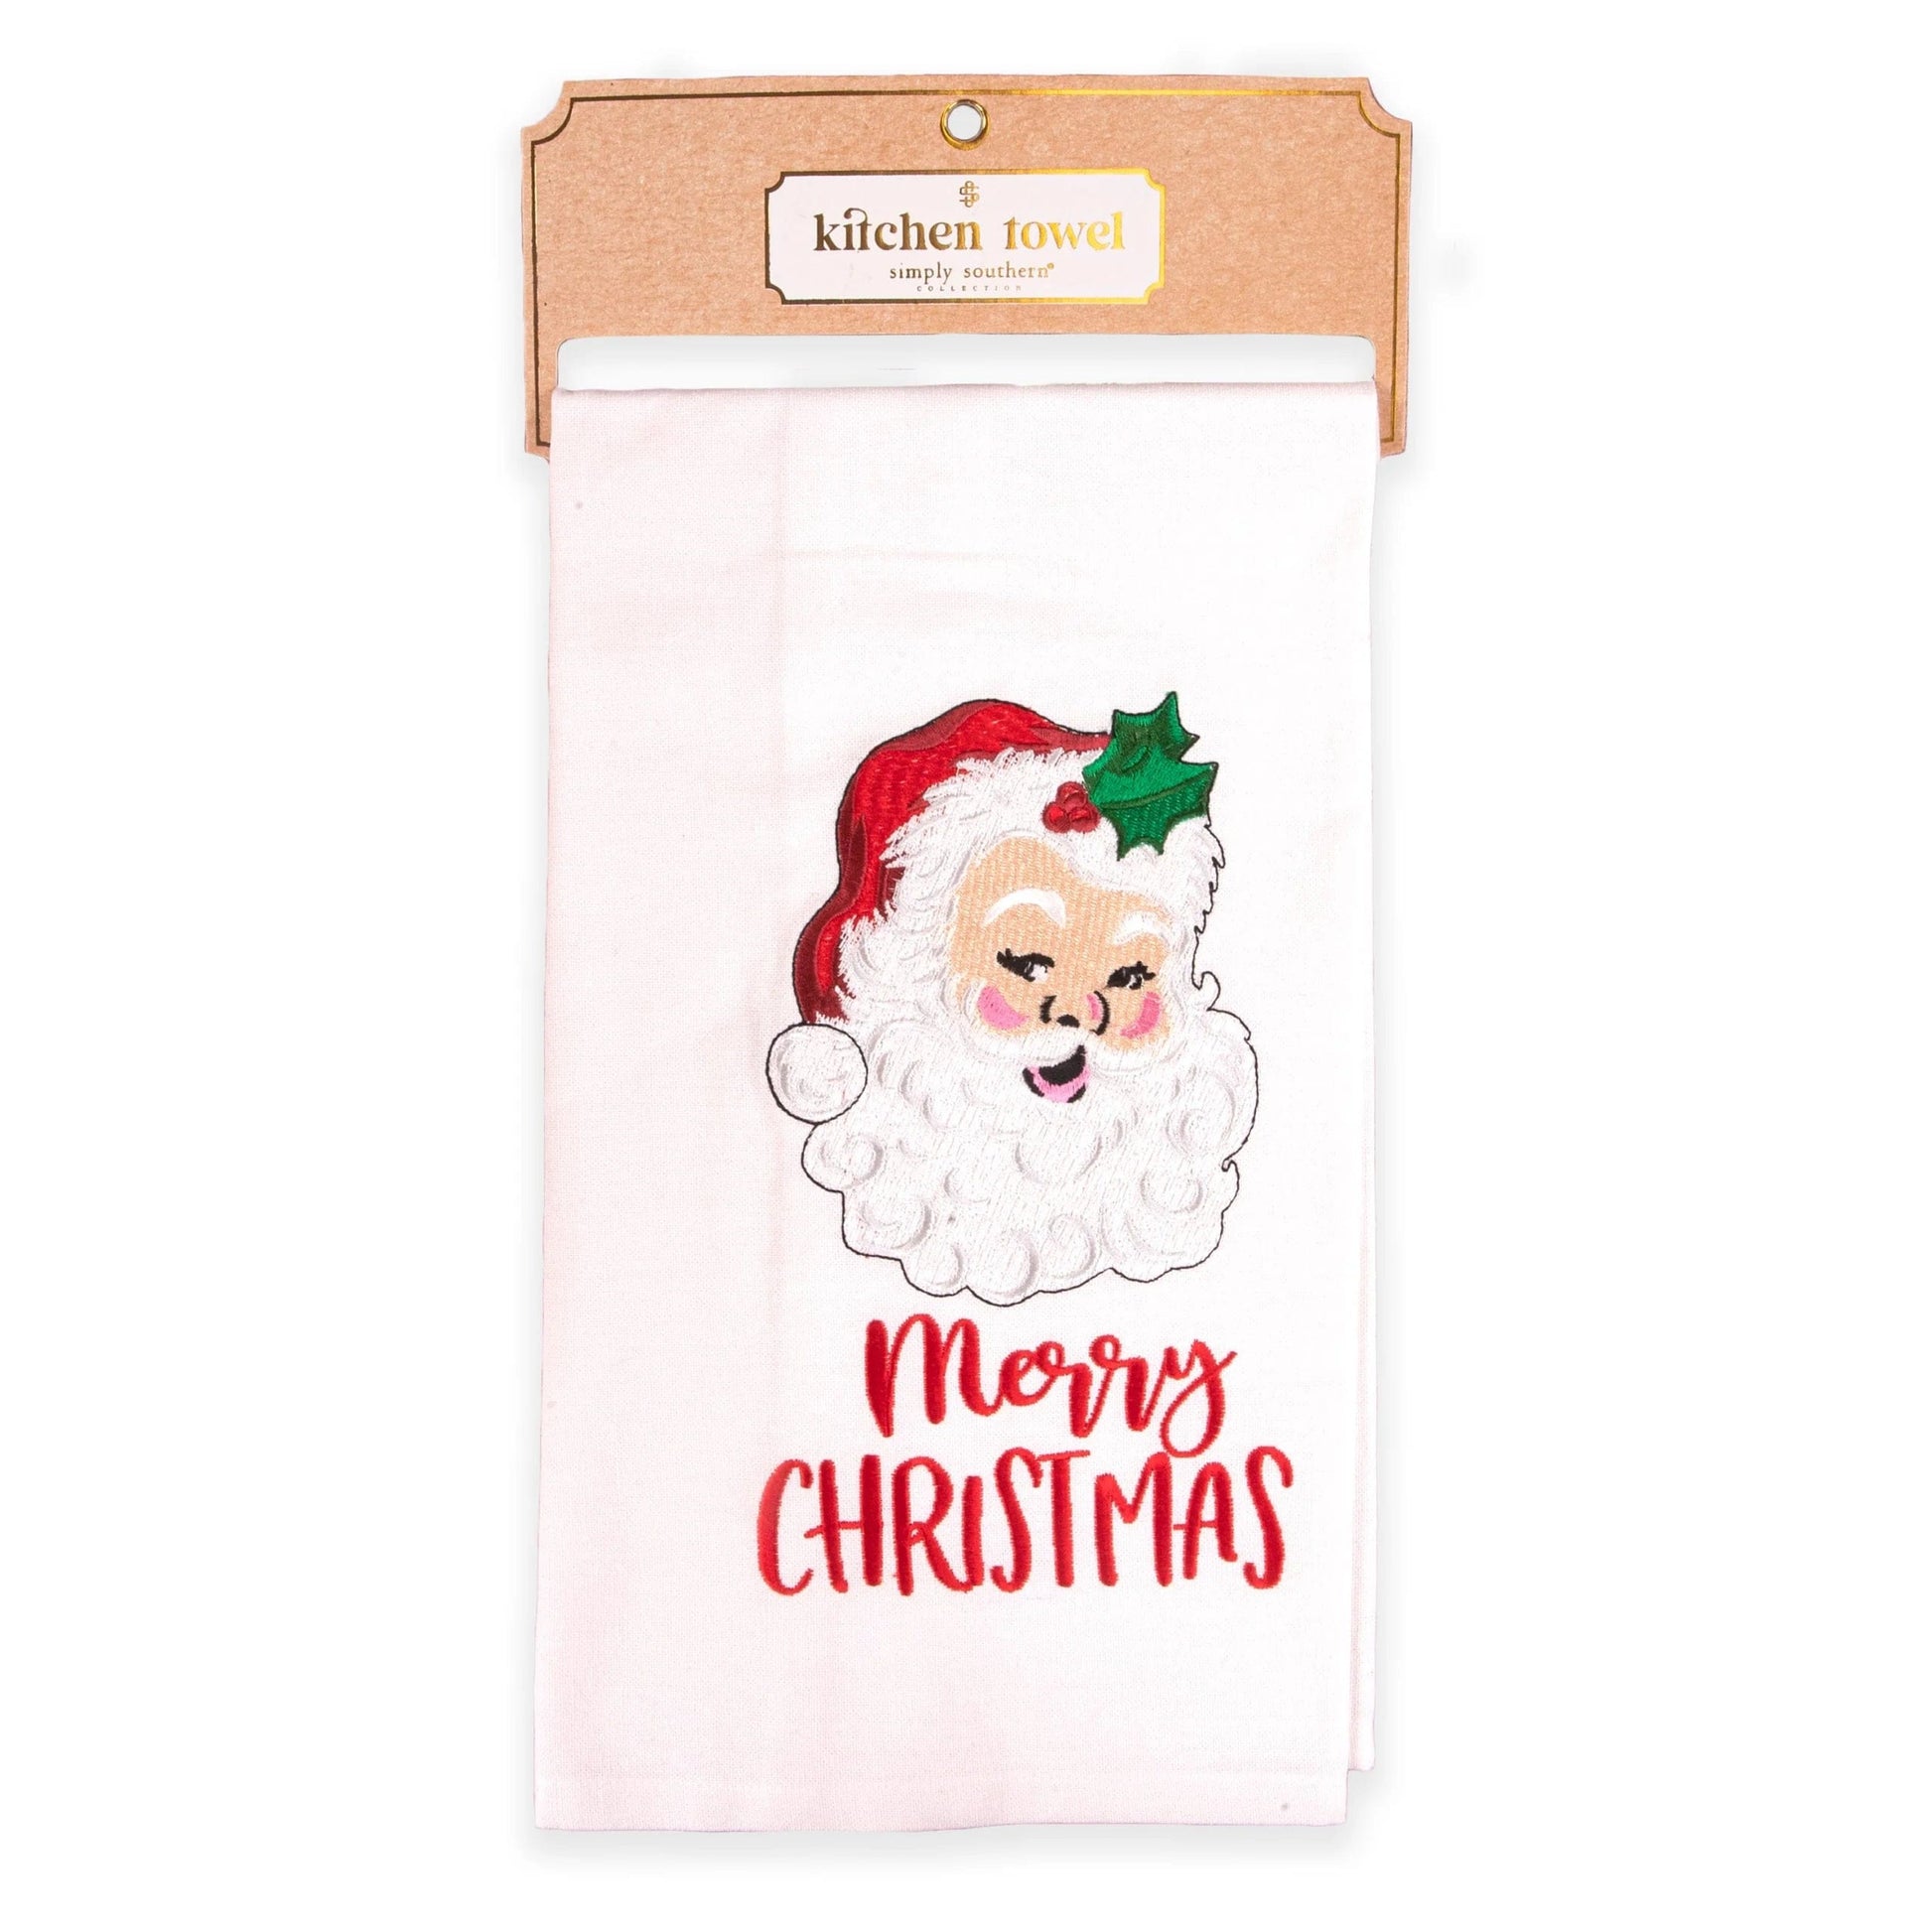 The Royal Standard Coolie - Can - Drink Santa Merry Christmas Simply Southern Christmas Towel